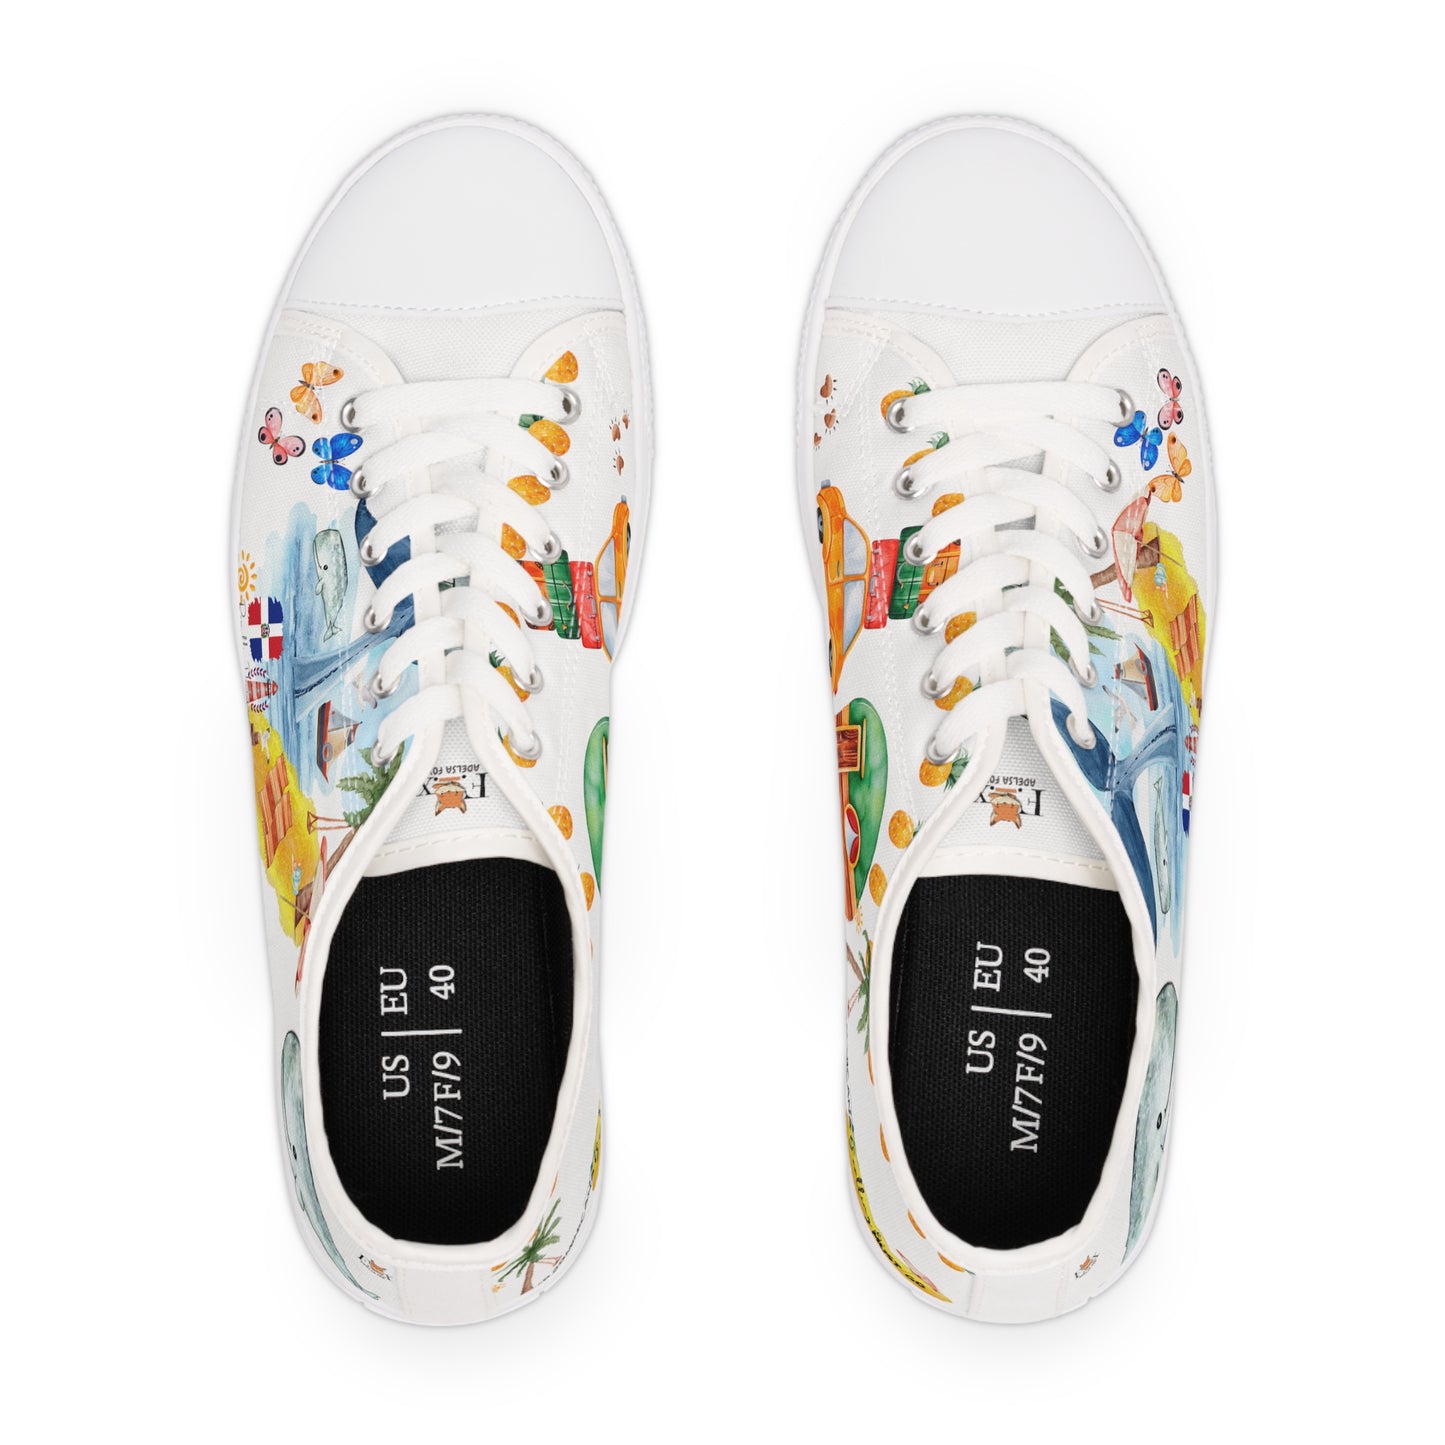 Dominican Republic is calling & i must Go- Travel Edition - White Background Sneakers